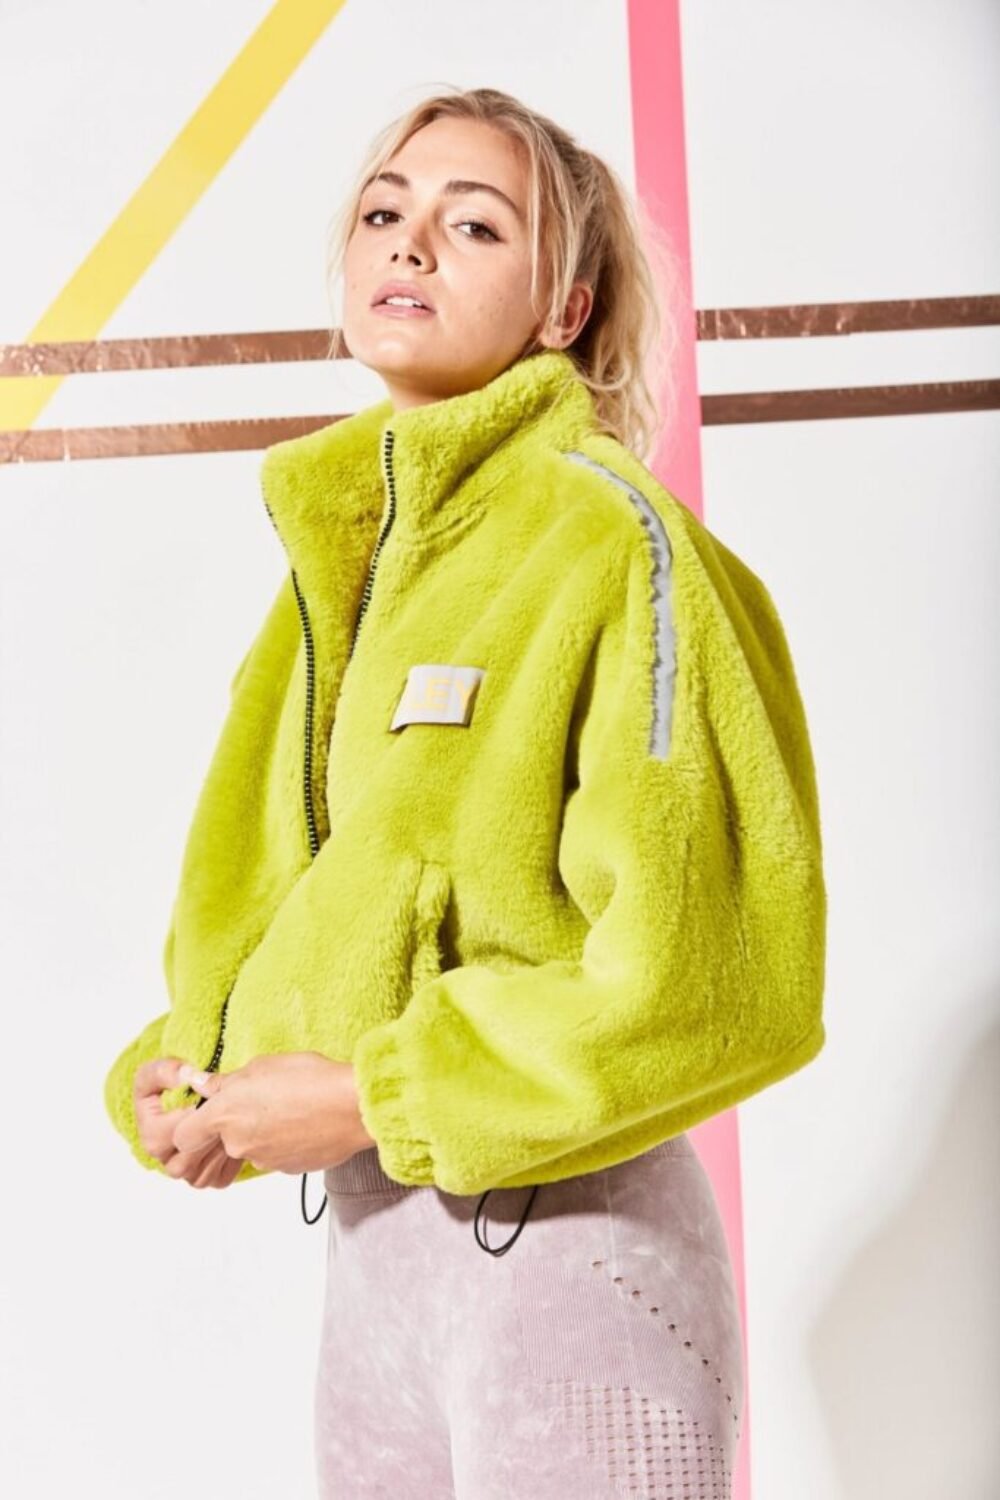 Shop Lux Lime Green Faux Fur Bomber Jacket and women's luxury and designer clothes at www.lux-apparel.co.uk